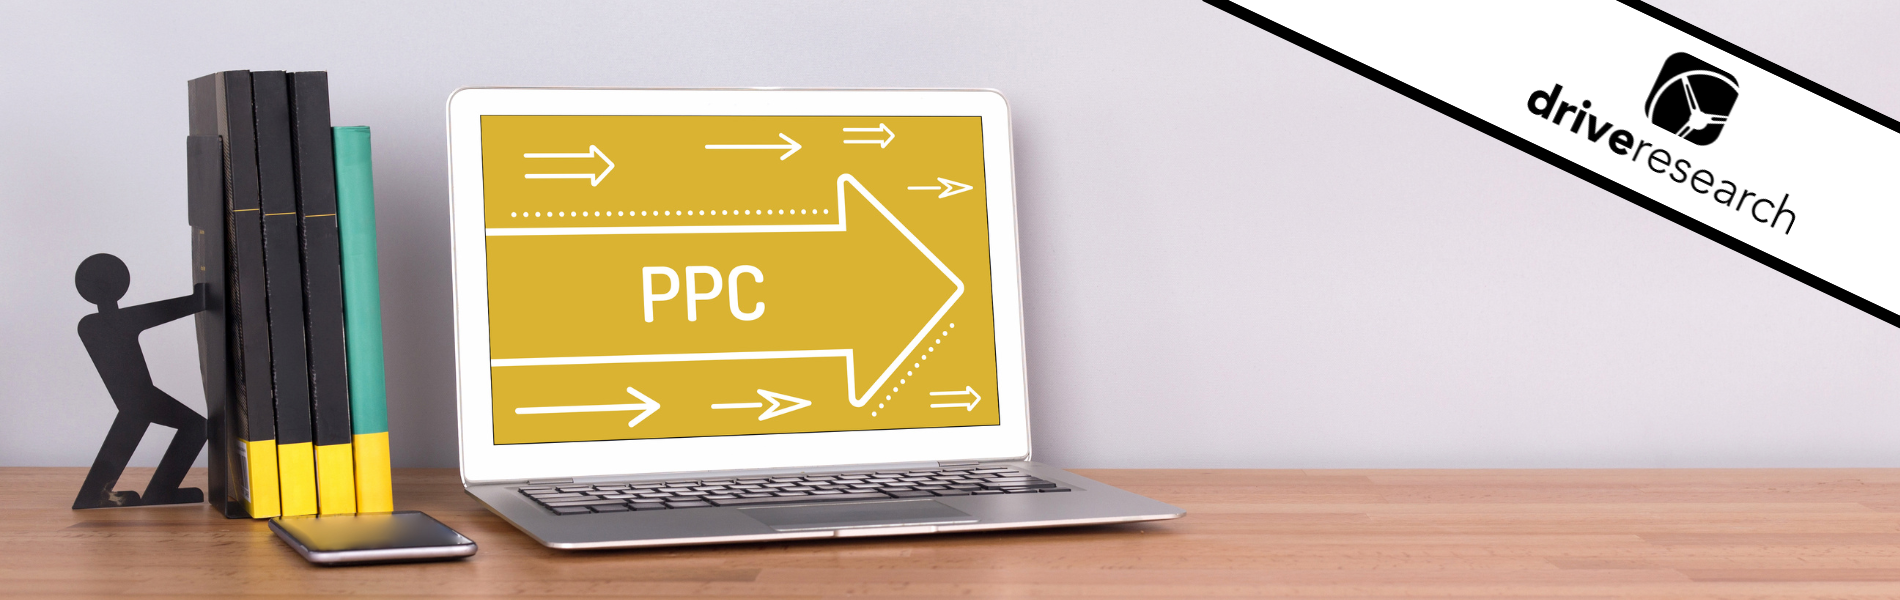 computer that says PPC